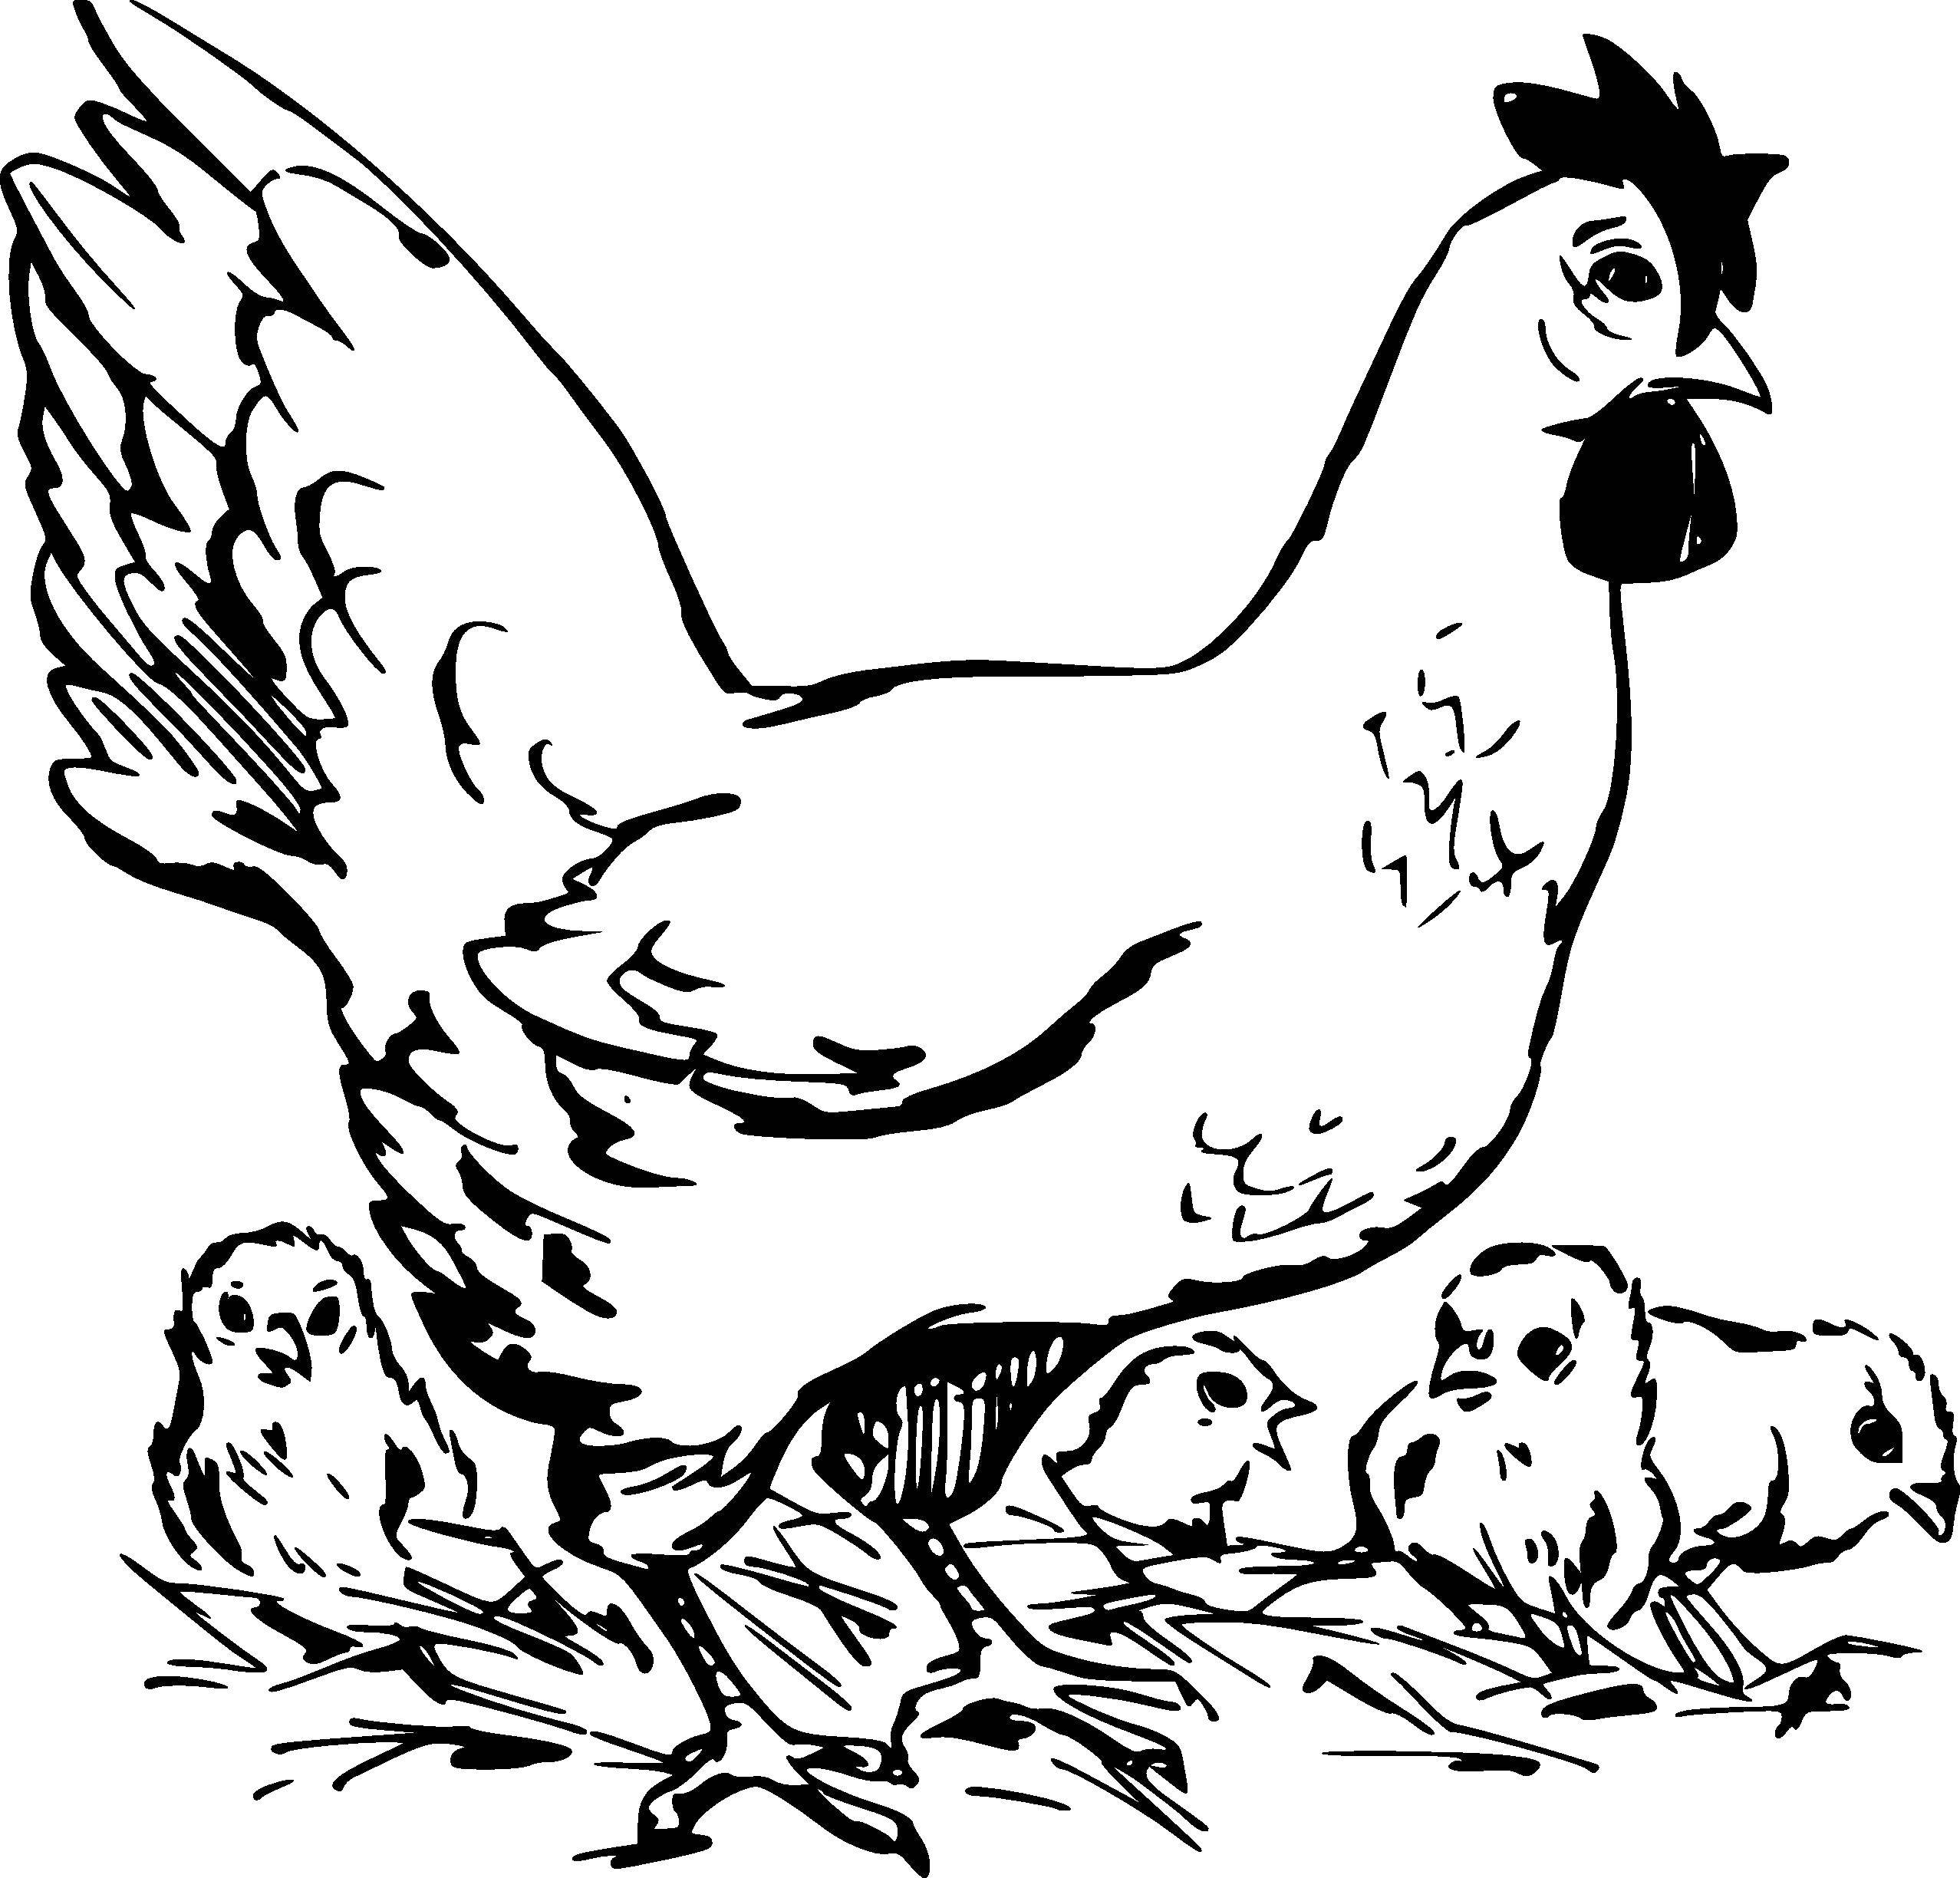 Coloring Chicken with children. Category birds. Tags:  Poultry, chicken.